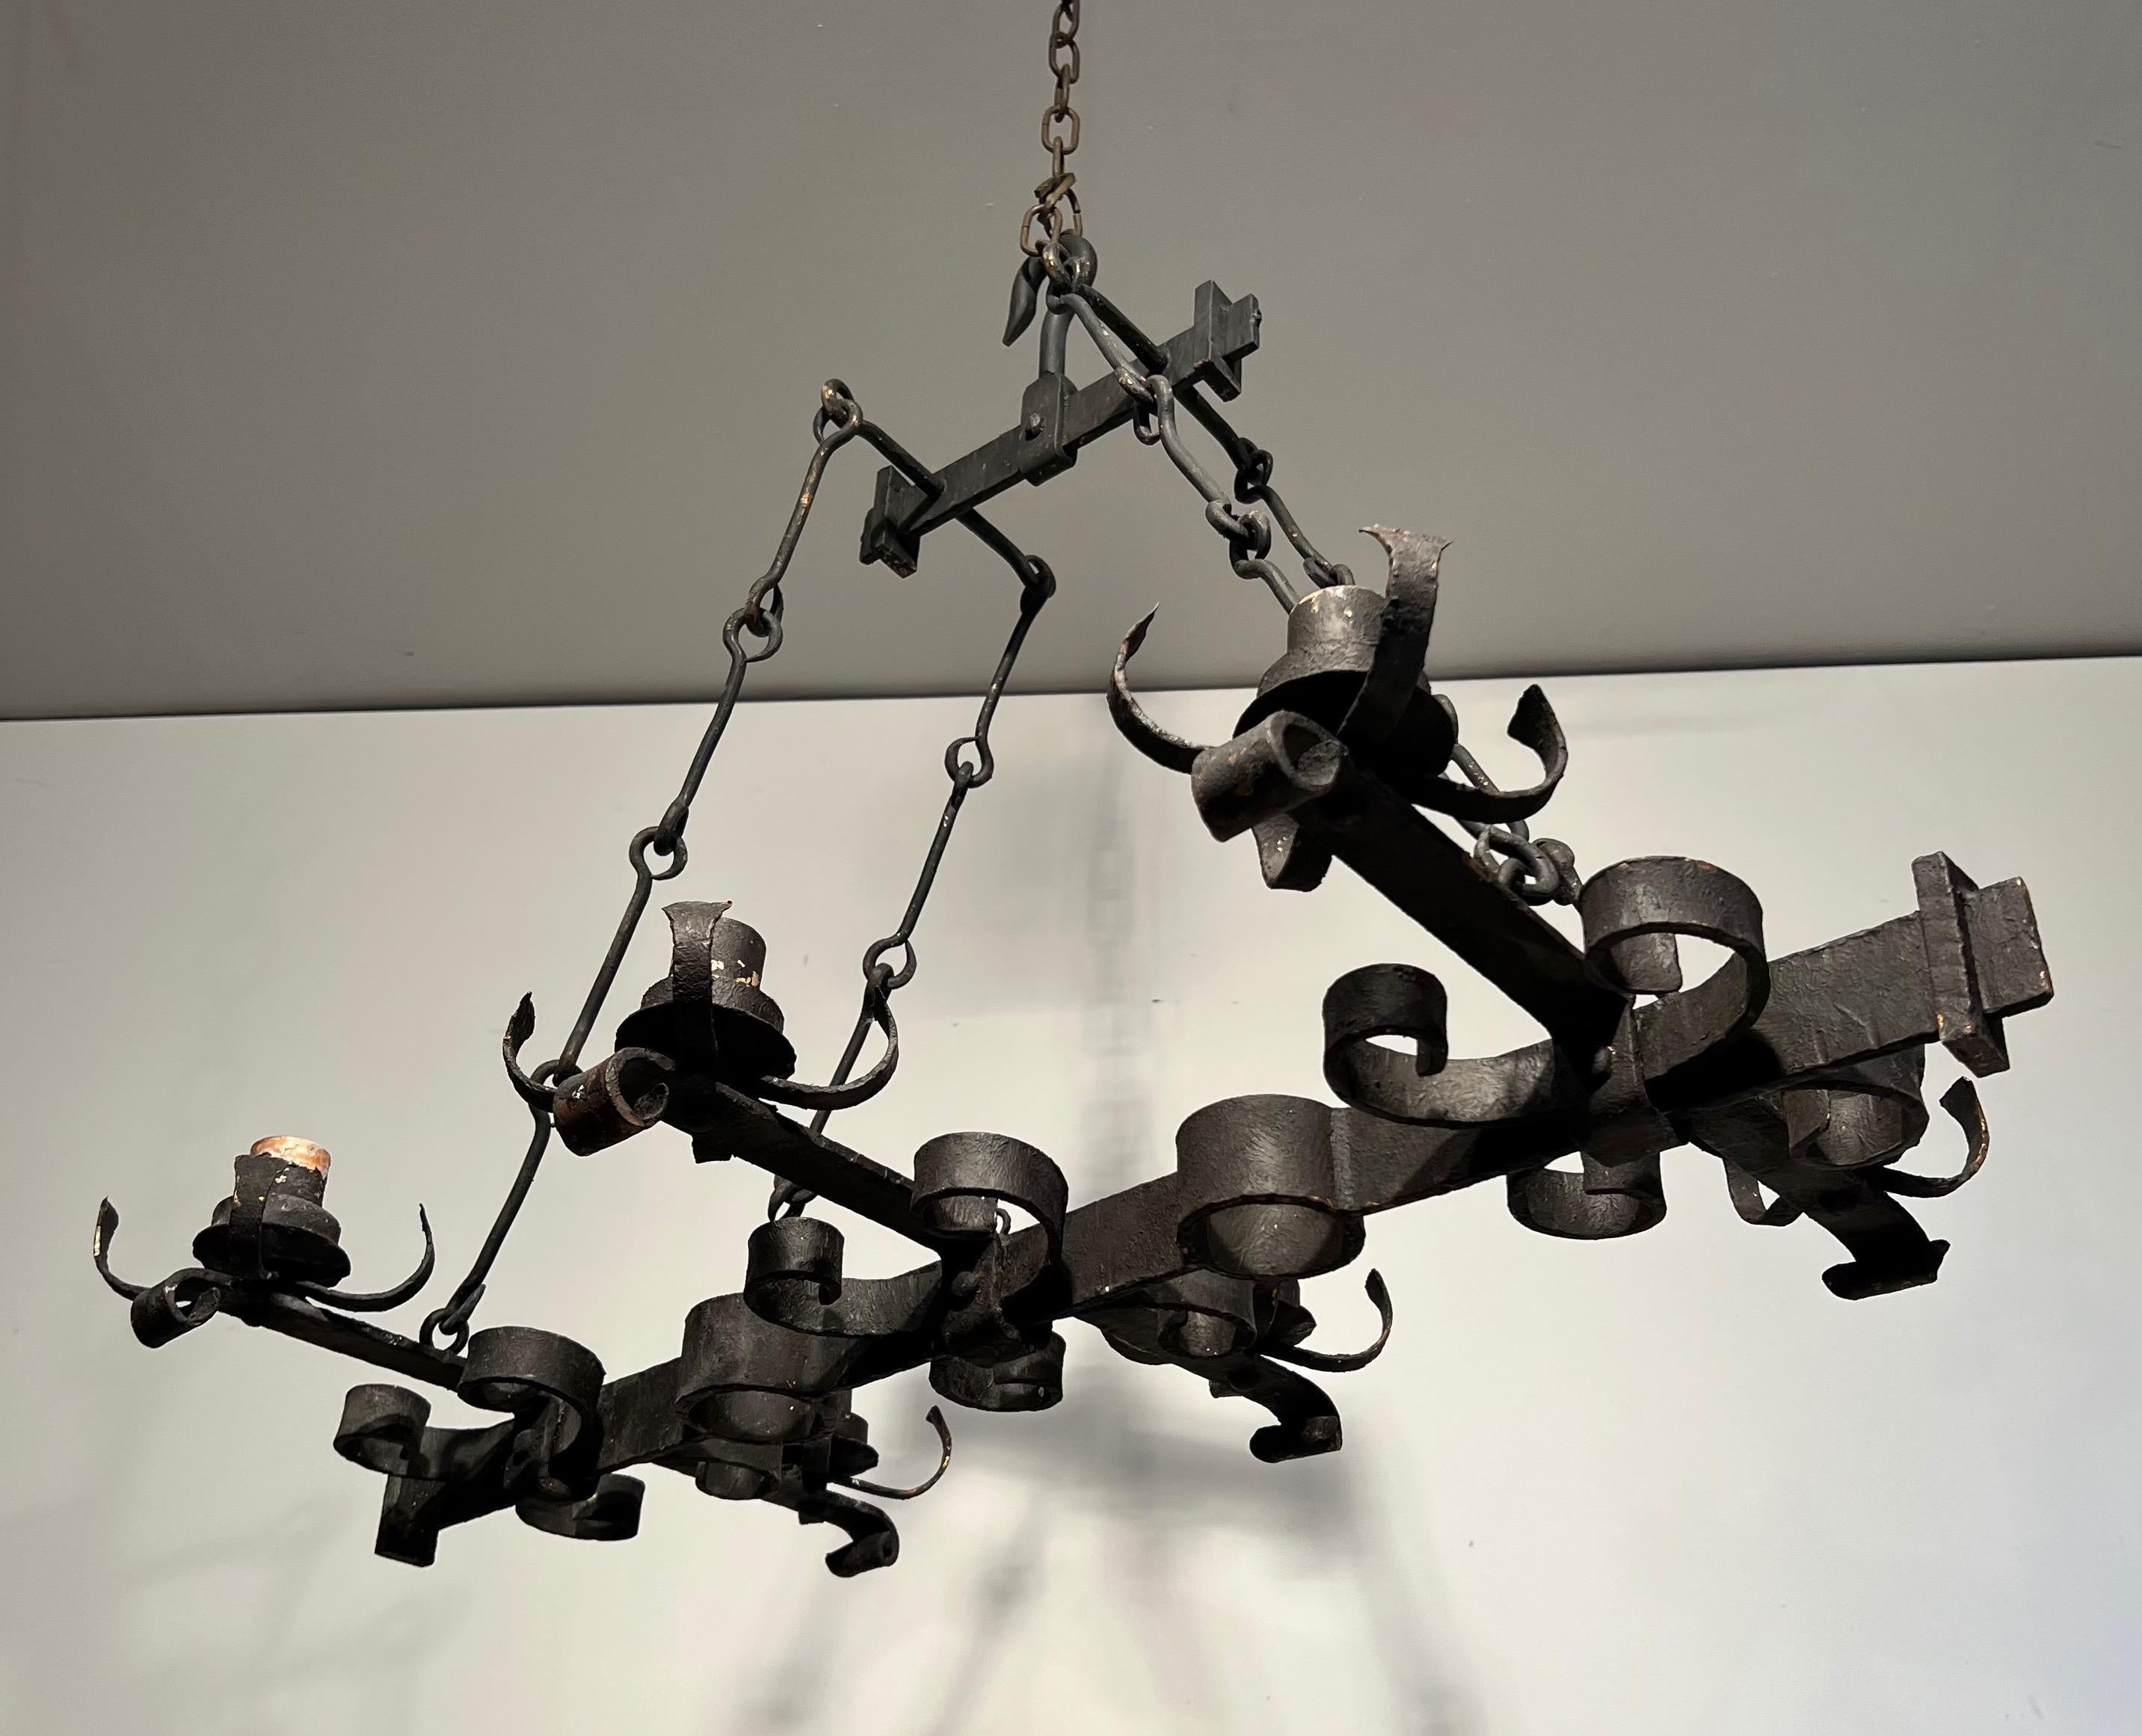 Mid-20th Century Wrought Iron Rectangular Chandelier in the Gothic Style. Circa 1950